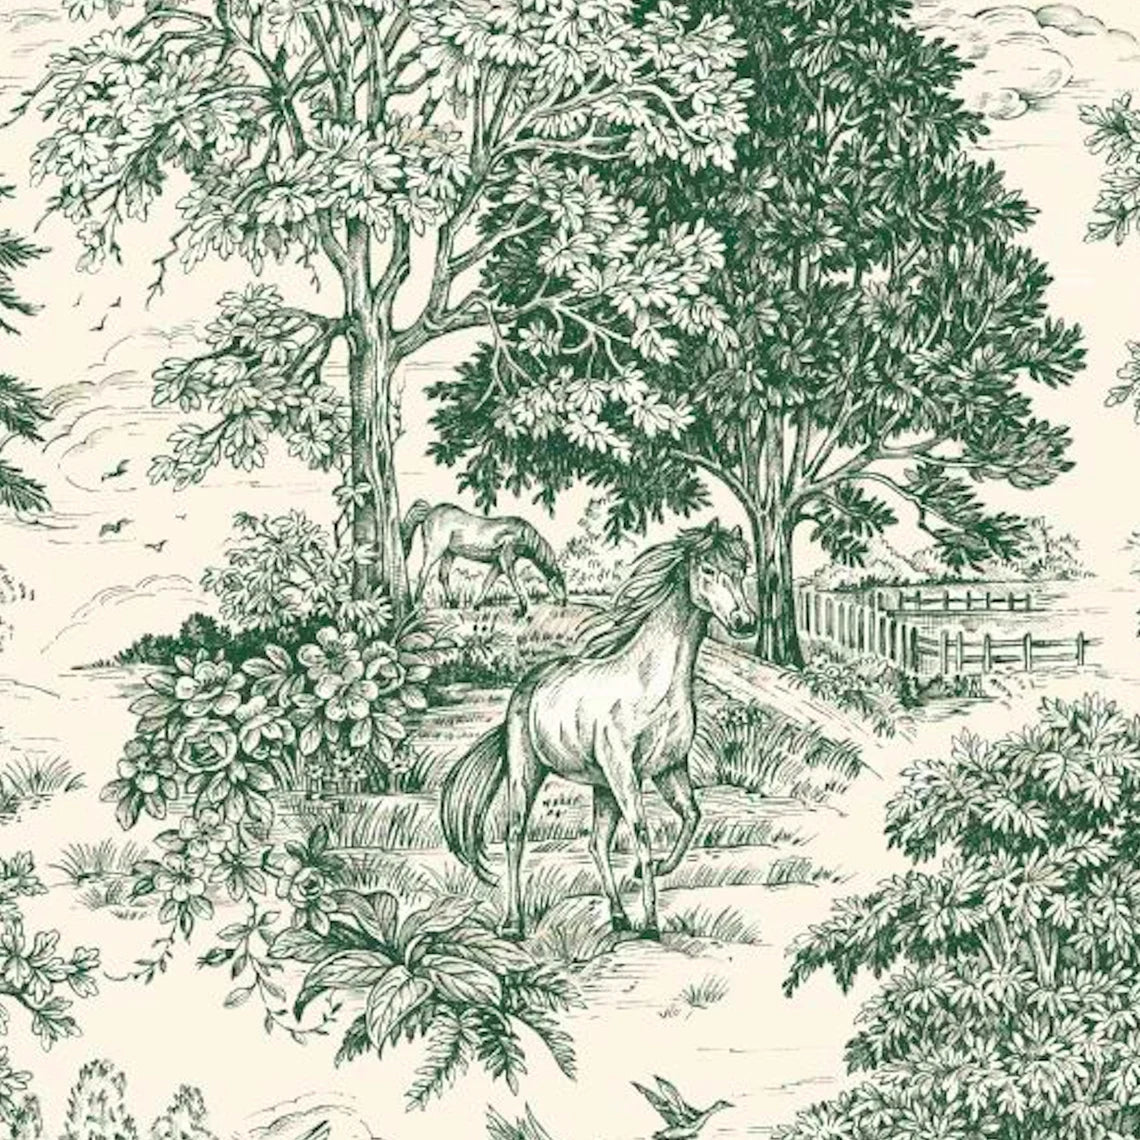 round tablecloth in Yellowstone Classic Green Country Toile- Horses, Deer, Dogs- Large Scale